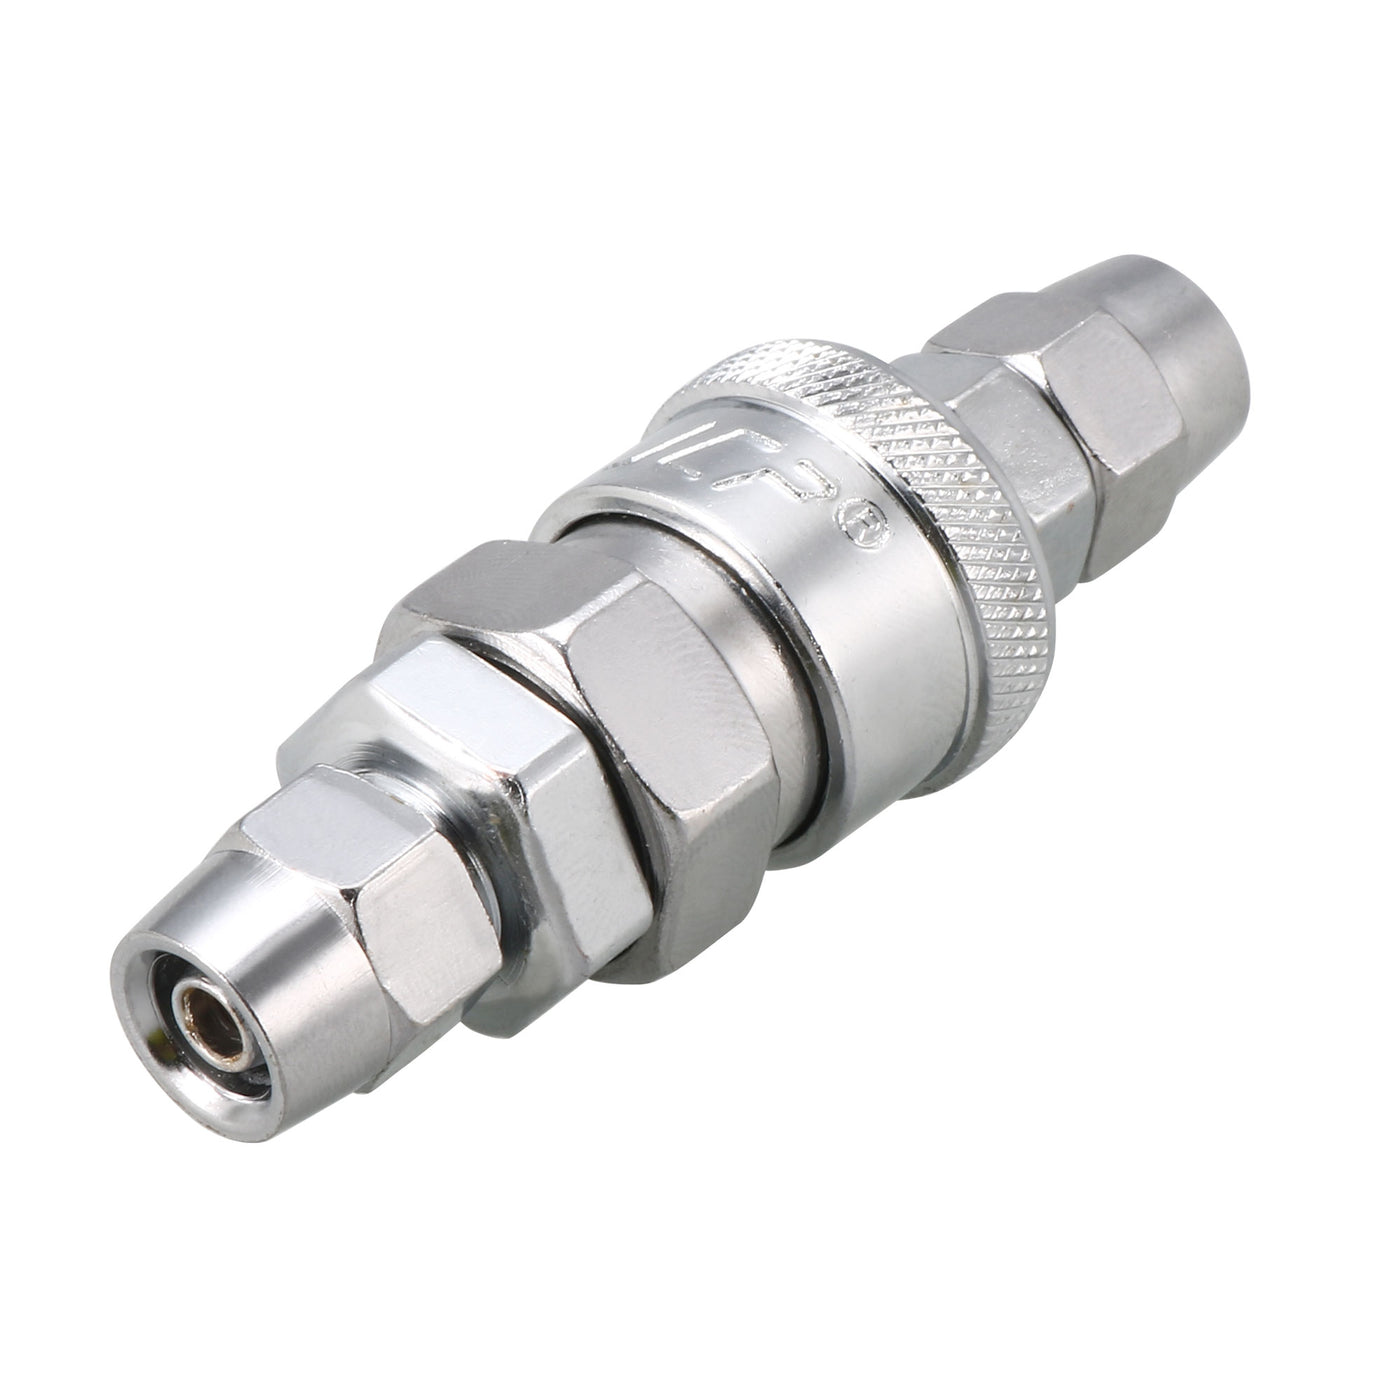 uxcell Uxcell 5mm x 8mm Pneumatic Air Hose Quick Fitting Connector Coupler Connector Adapter